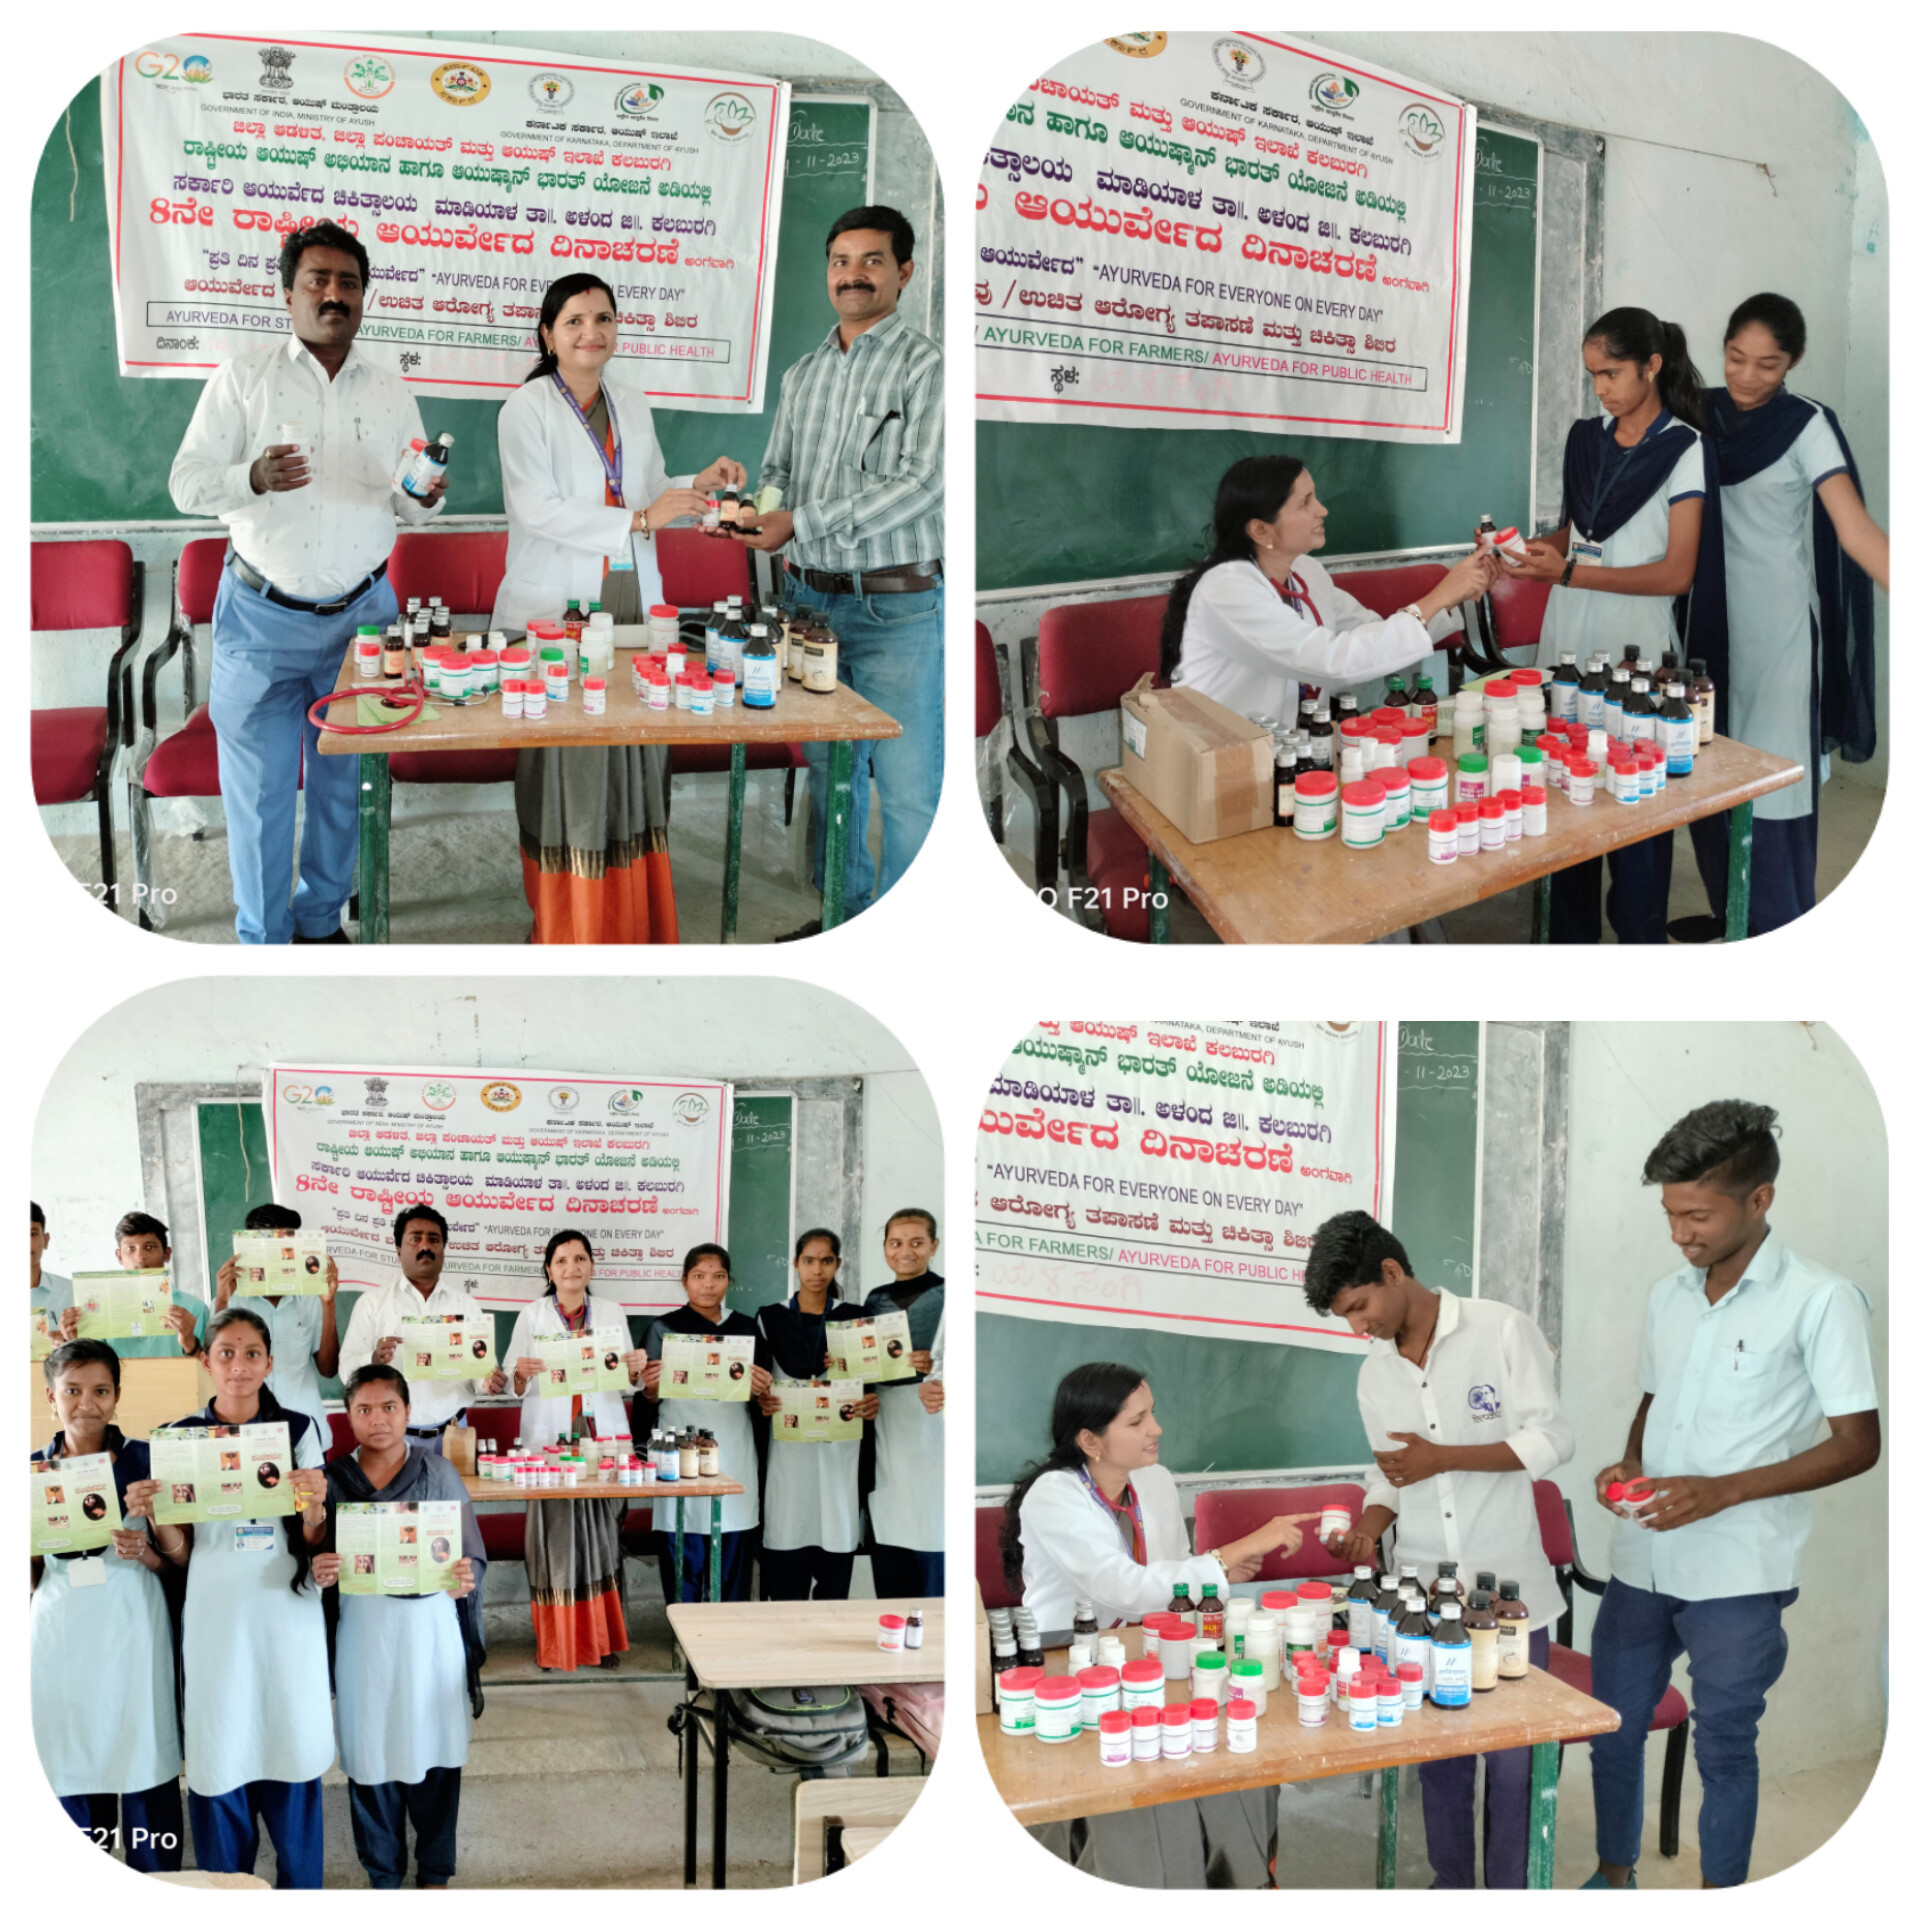 Explained about dinacharya and Ayurveda for students and conducted health camp at Gulbarga